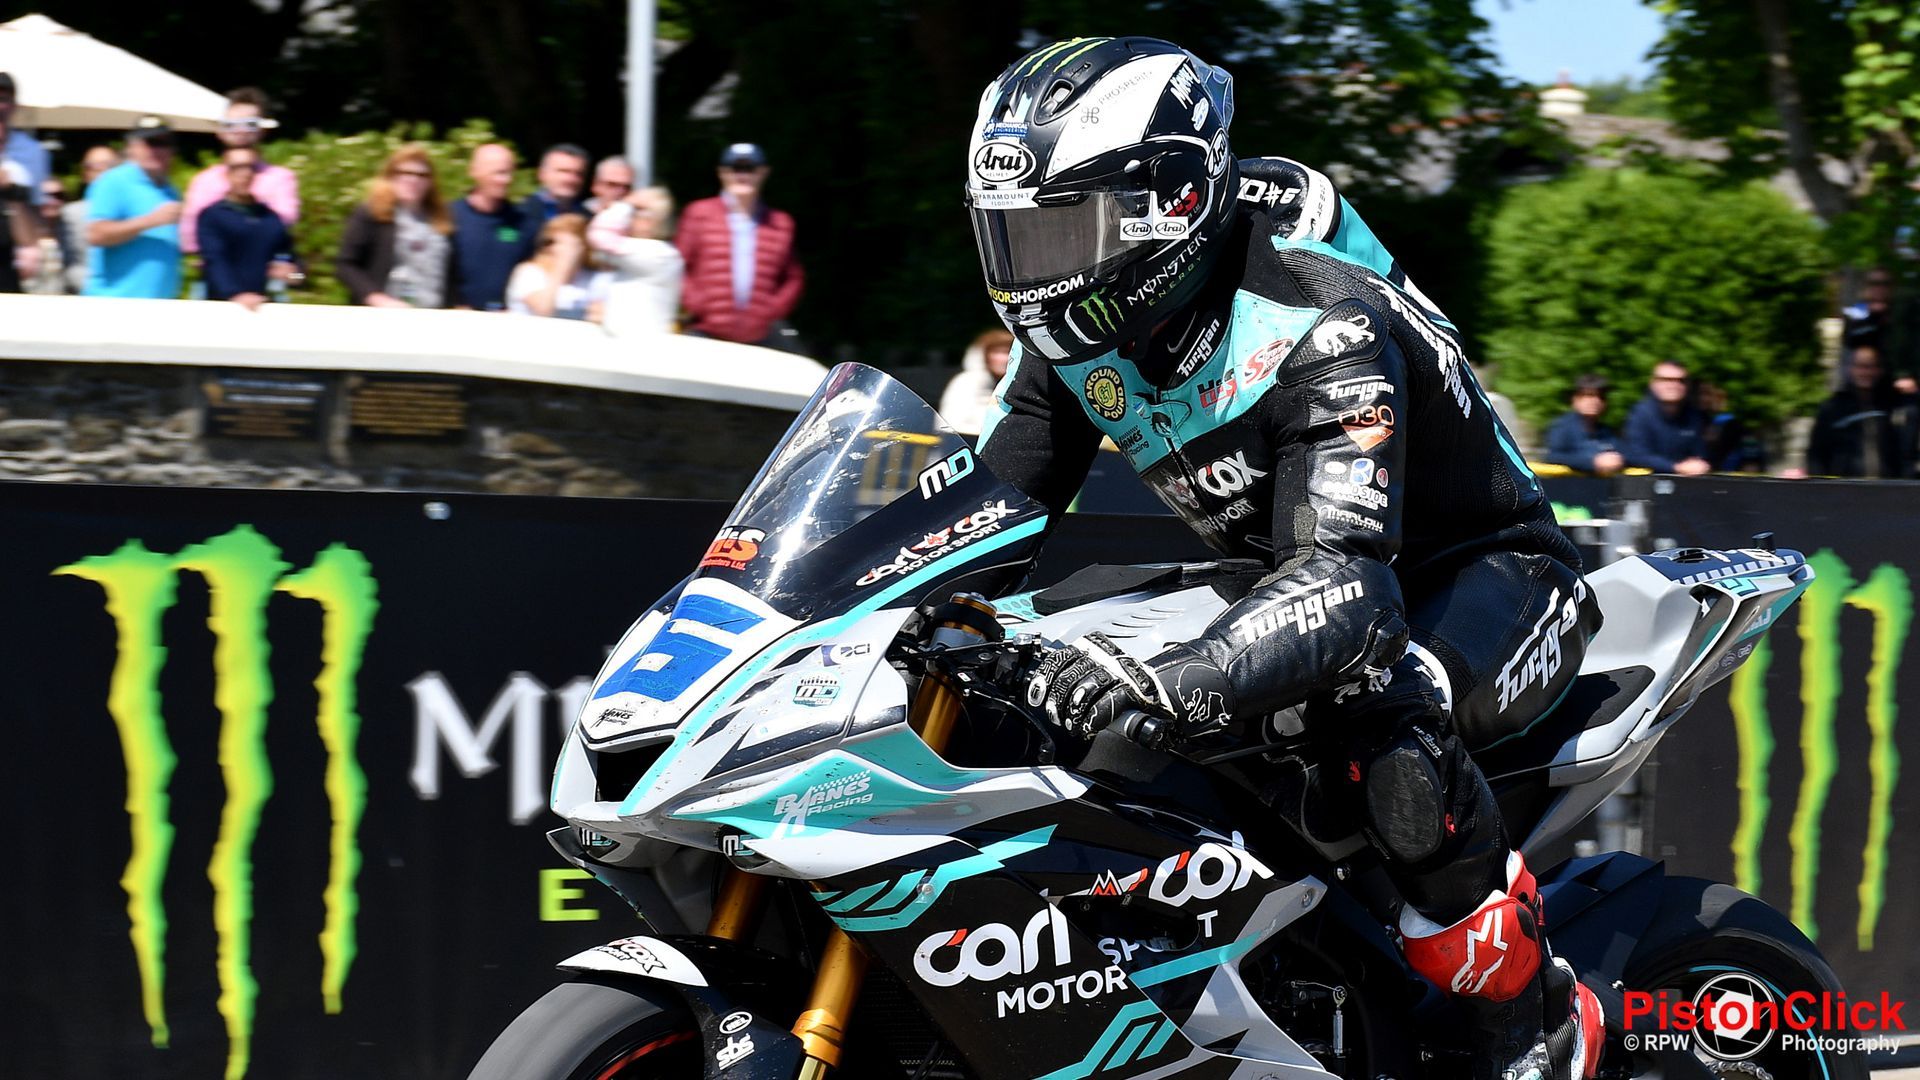 Michael Dunlop at the start line for the Isle of Man TT 2023